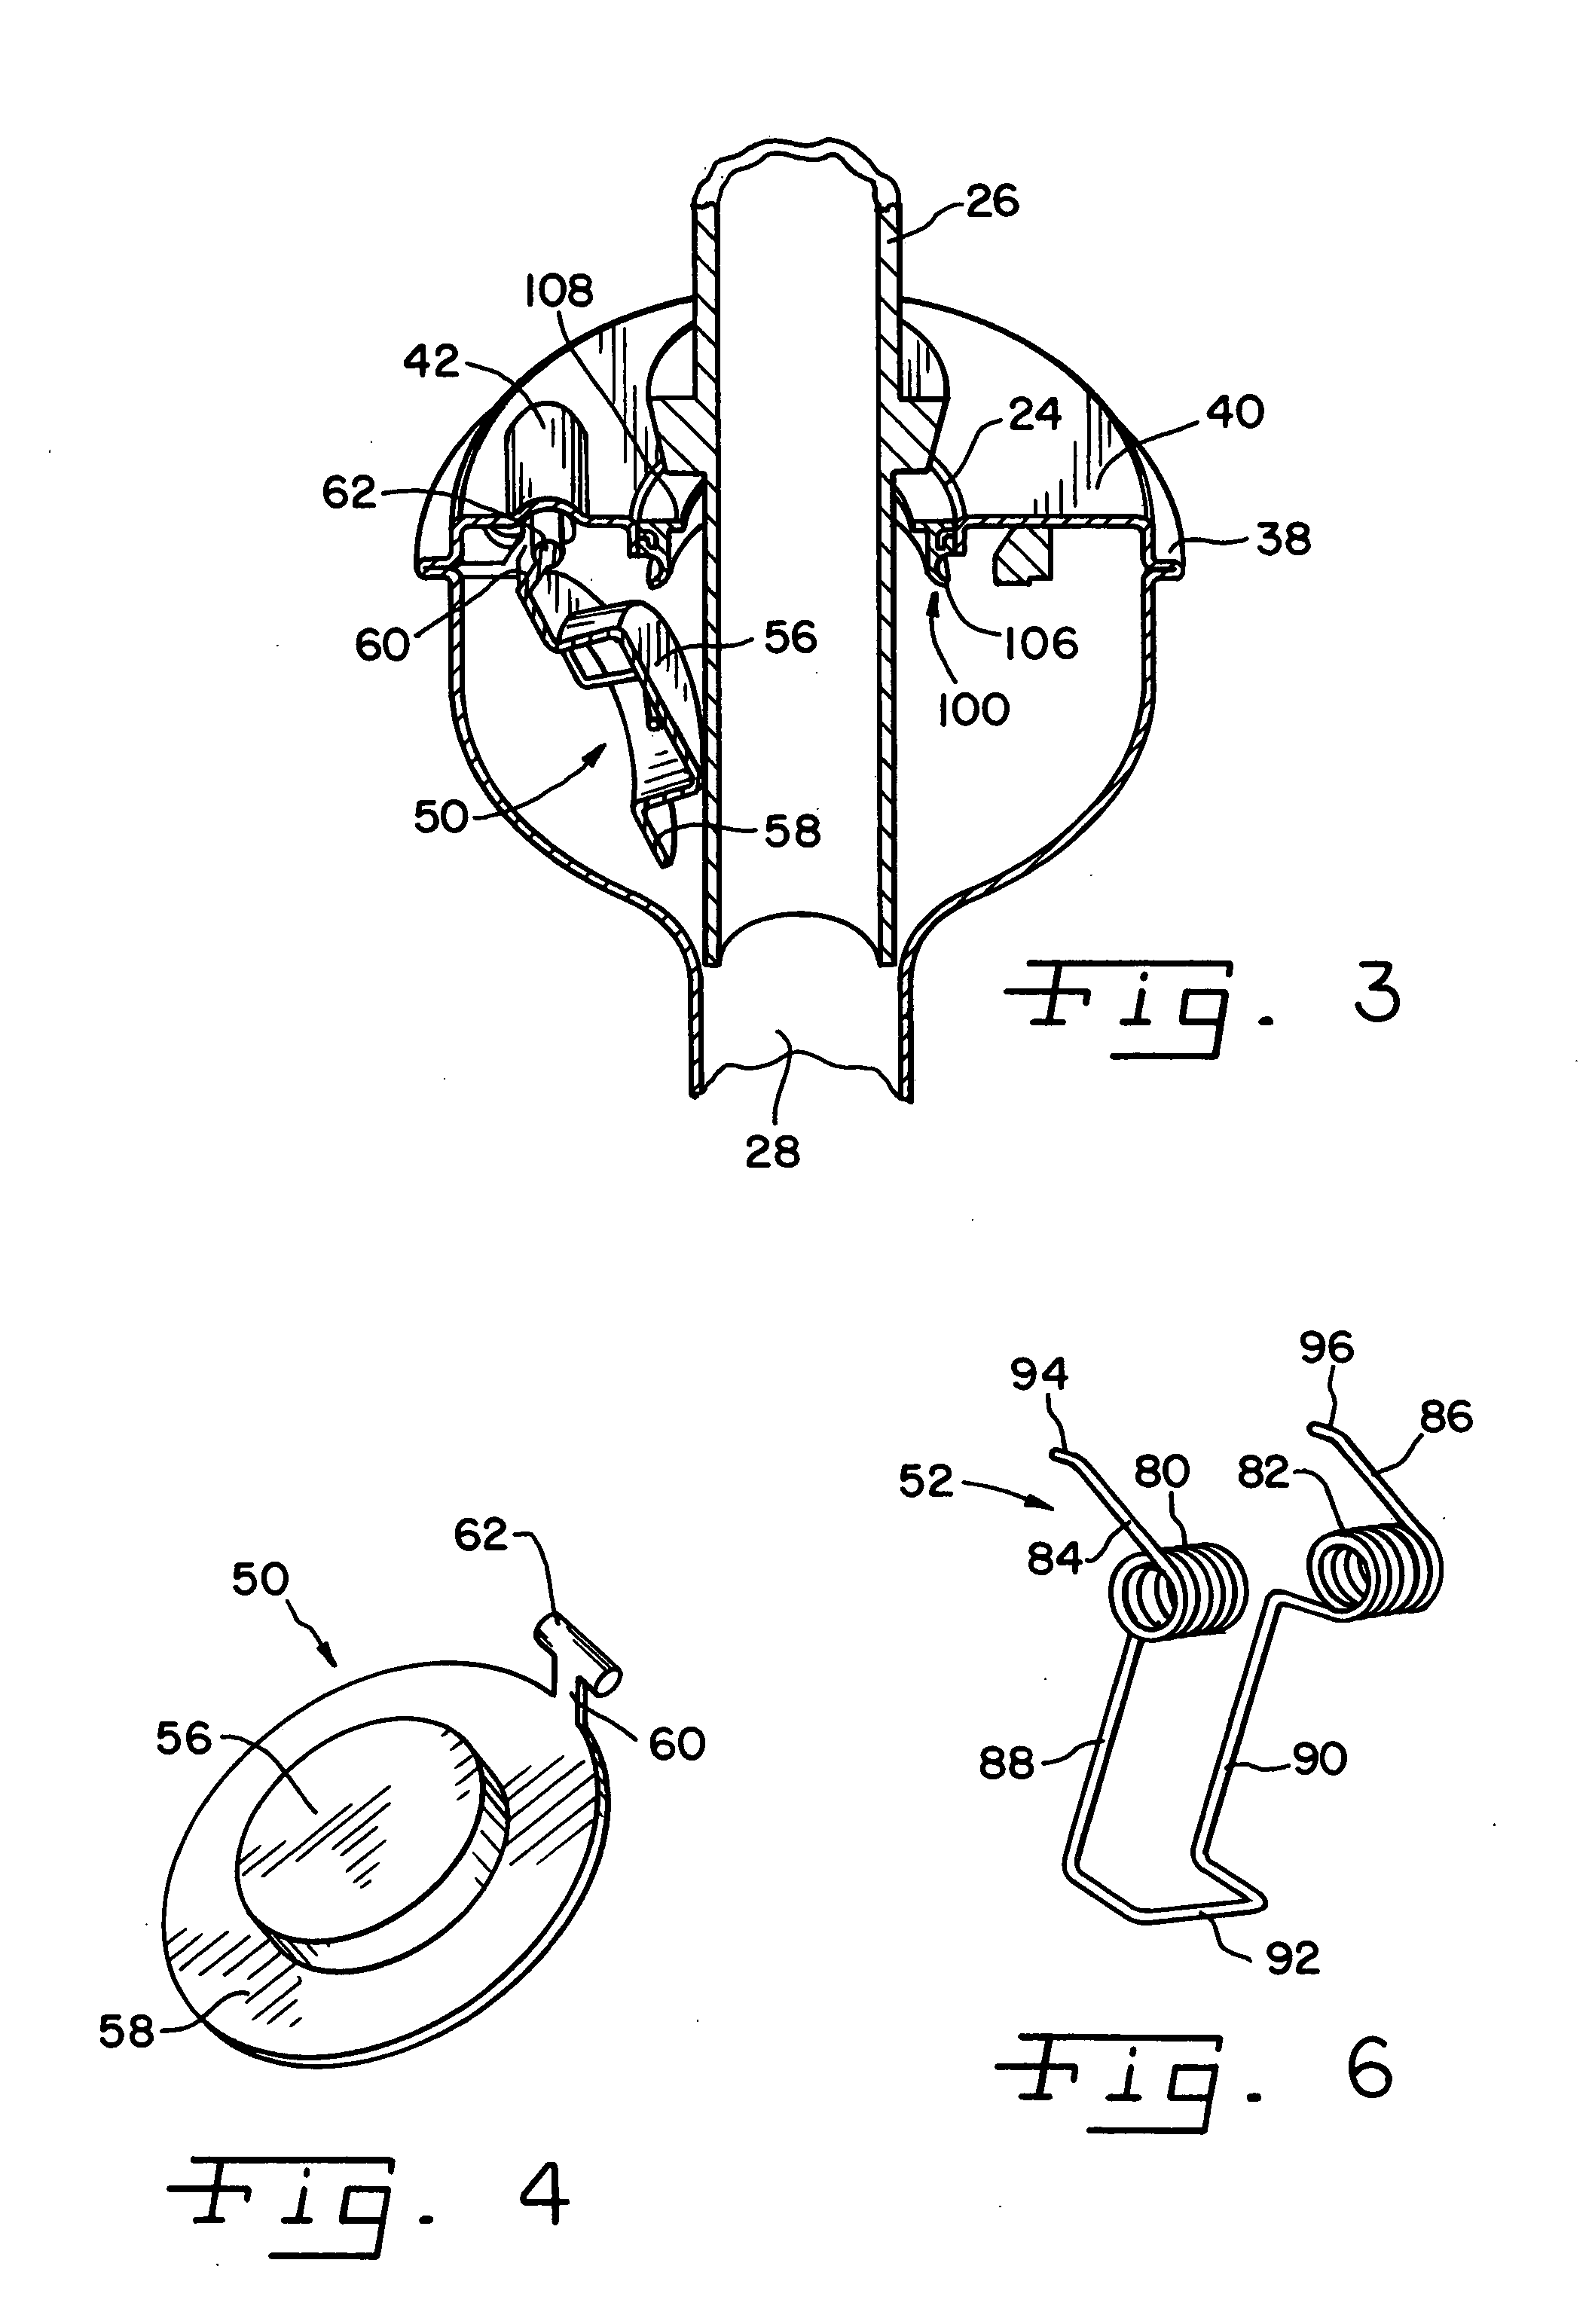 Fuel shut-off valve assembly with associated components and methods of making and assembling the same